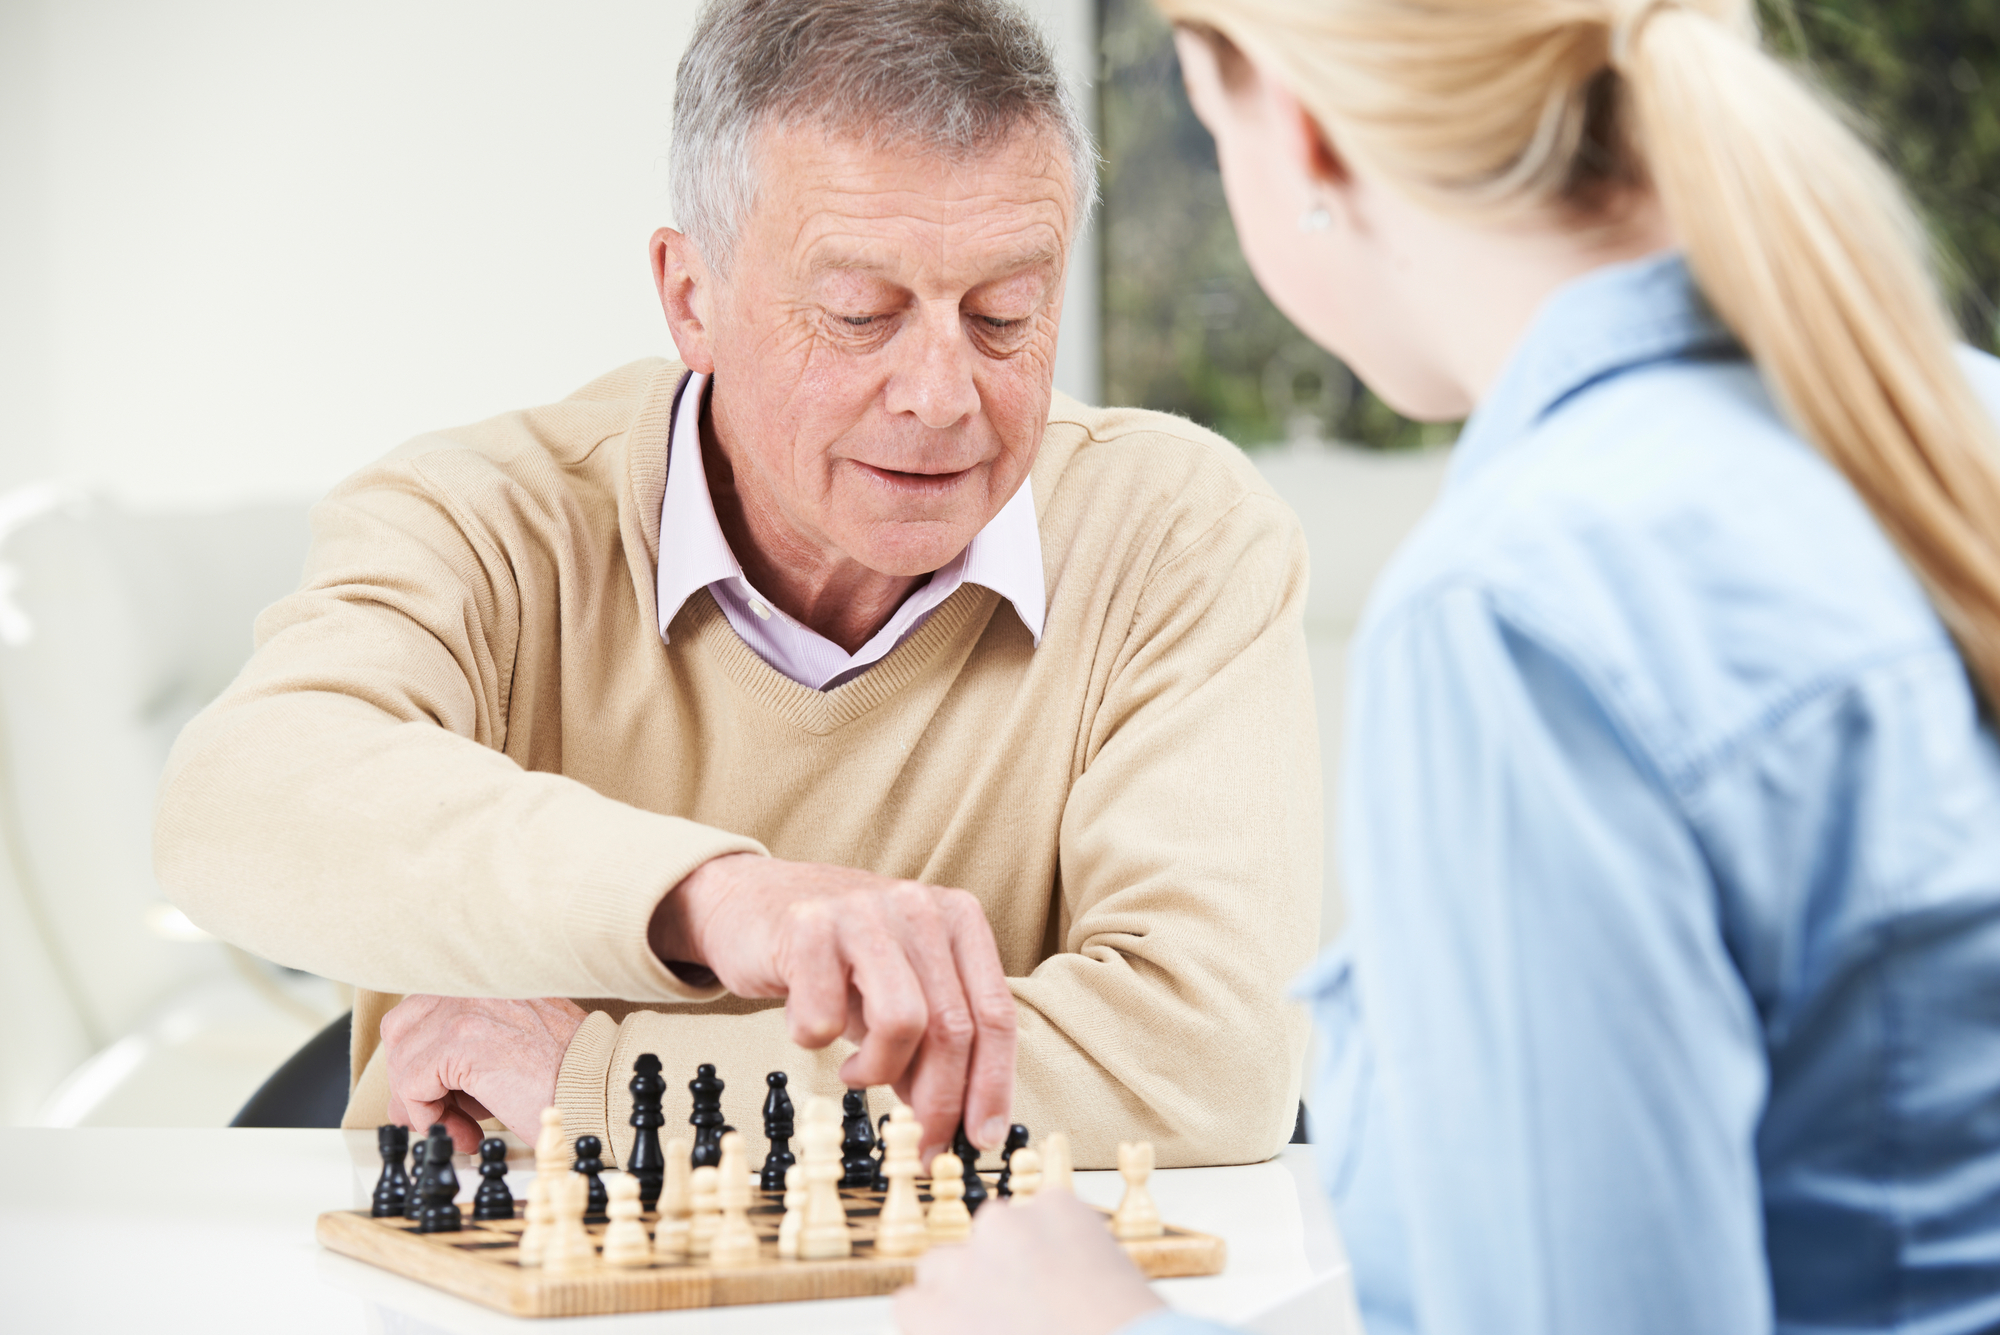 Helping Seniors Stay Active at Home